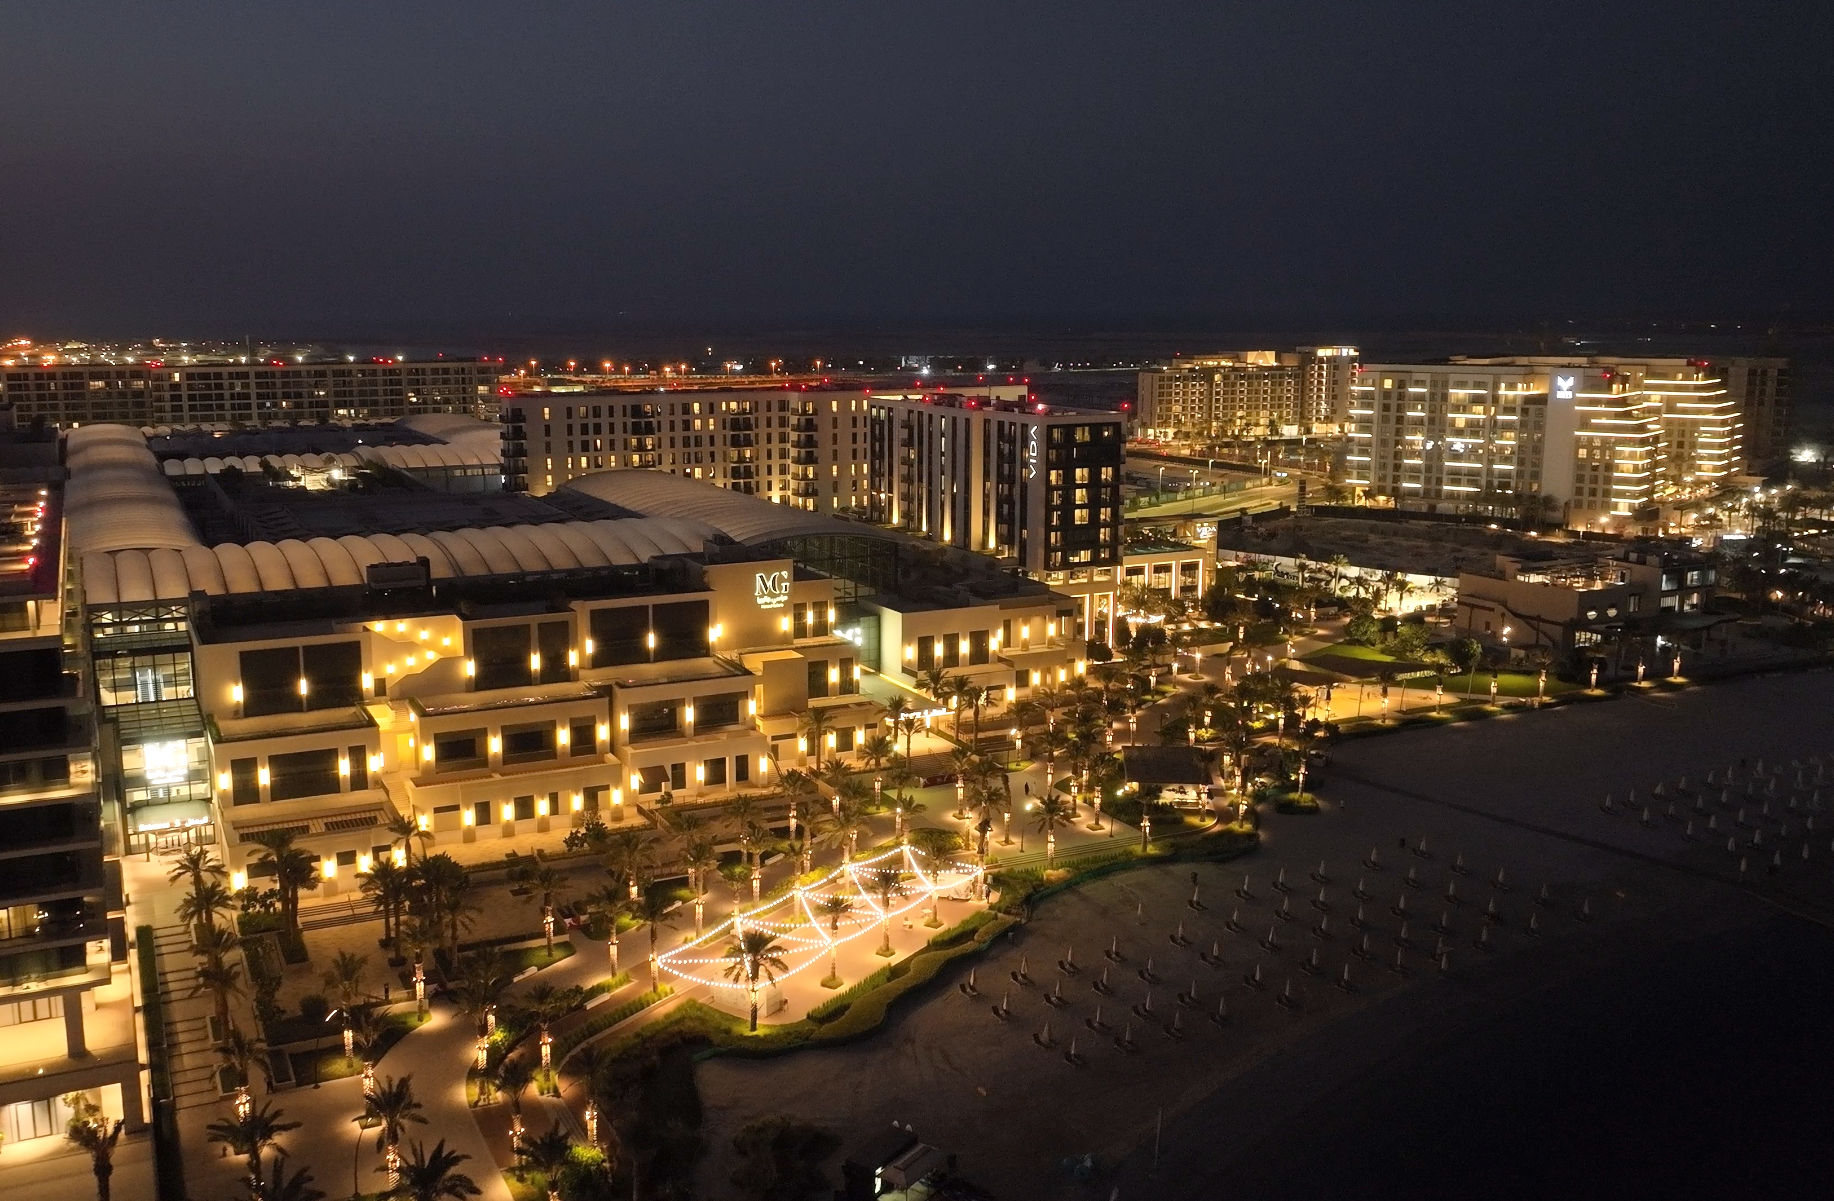 marassi galleria becomes the ultimate eid destination with unforgettable festivities